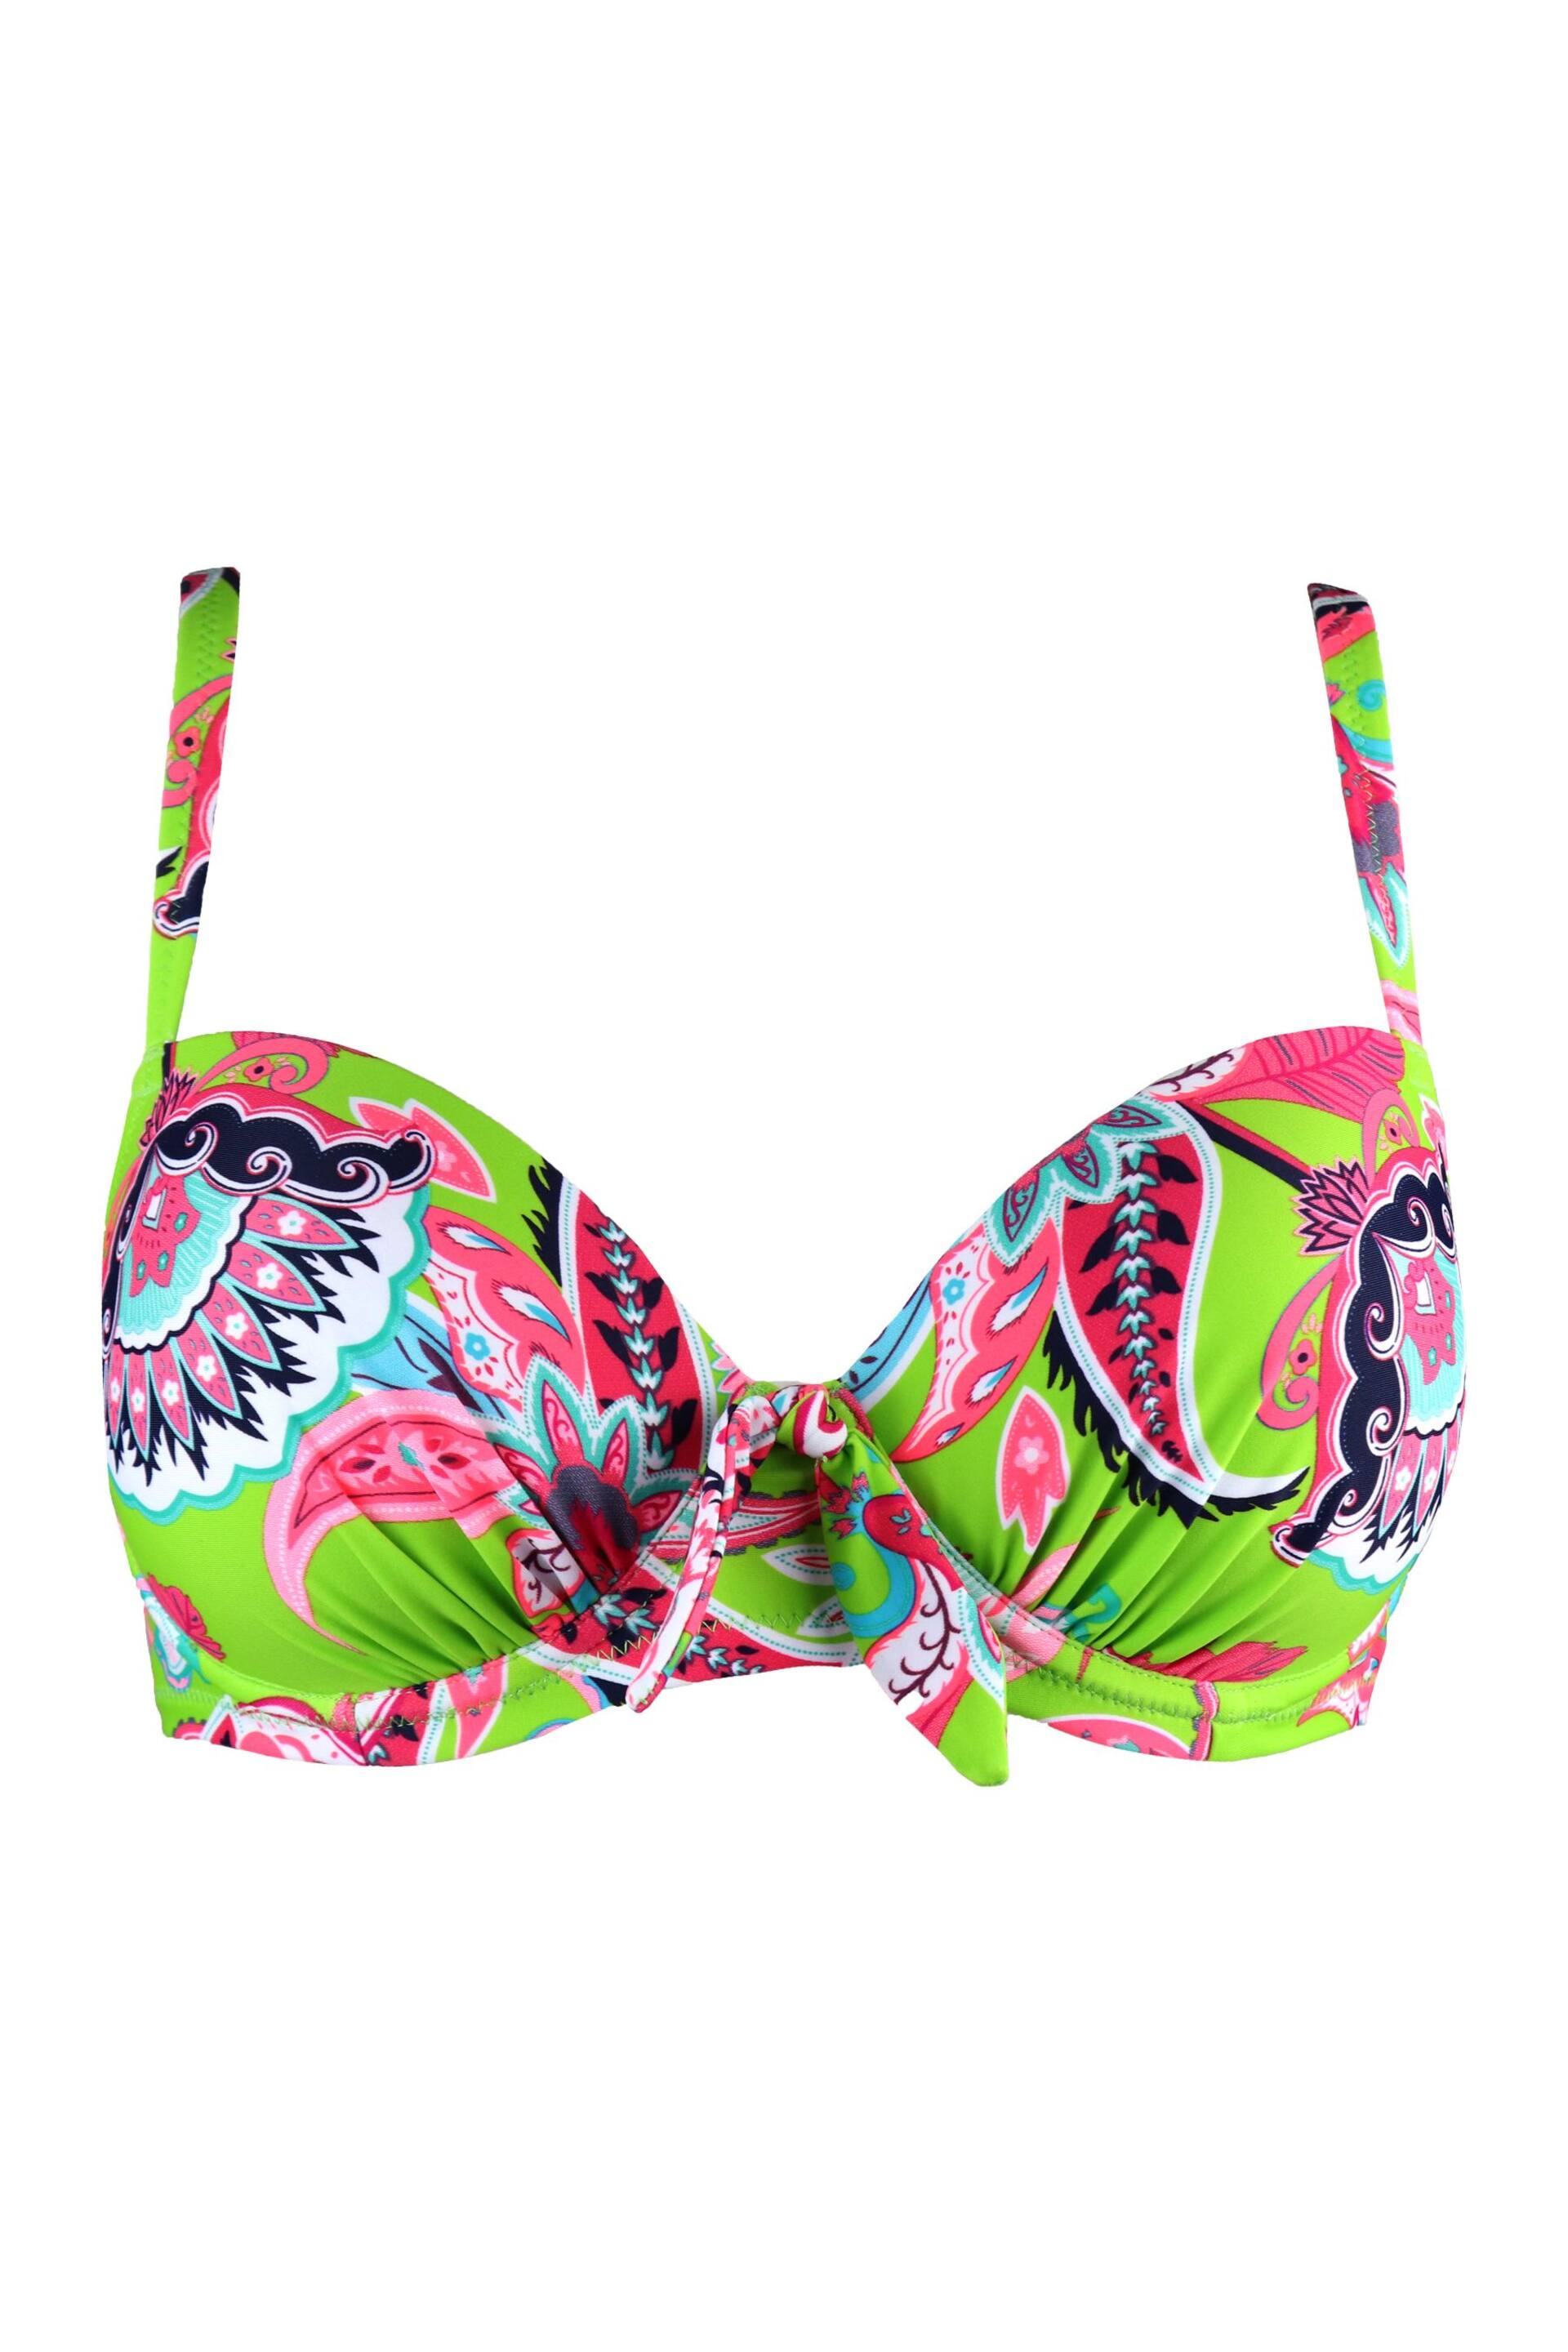 Pour Moi Green & Pink Multi Heatwave Halter Underwired Top - Image 4 of 5